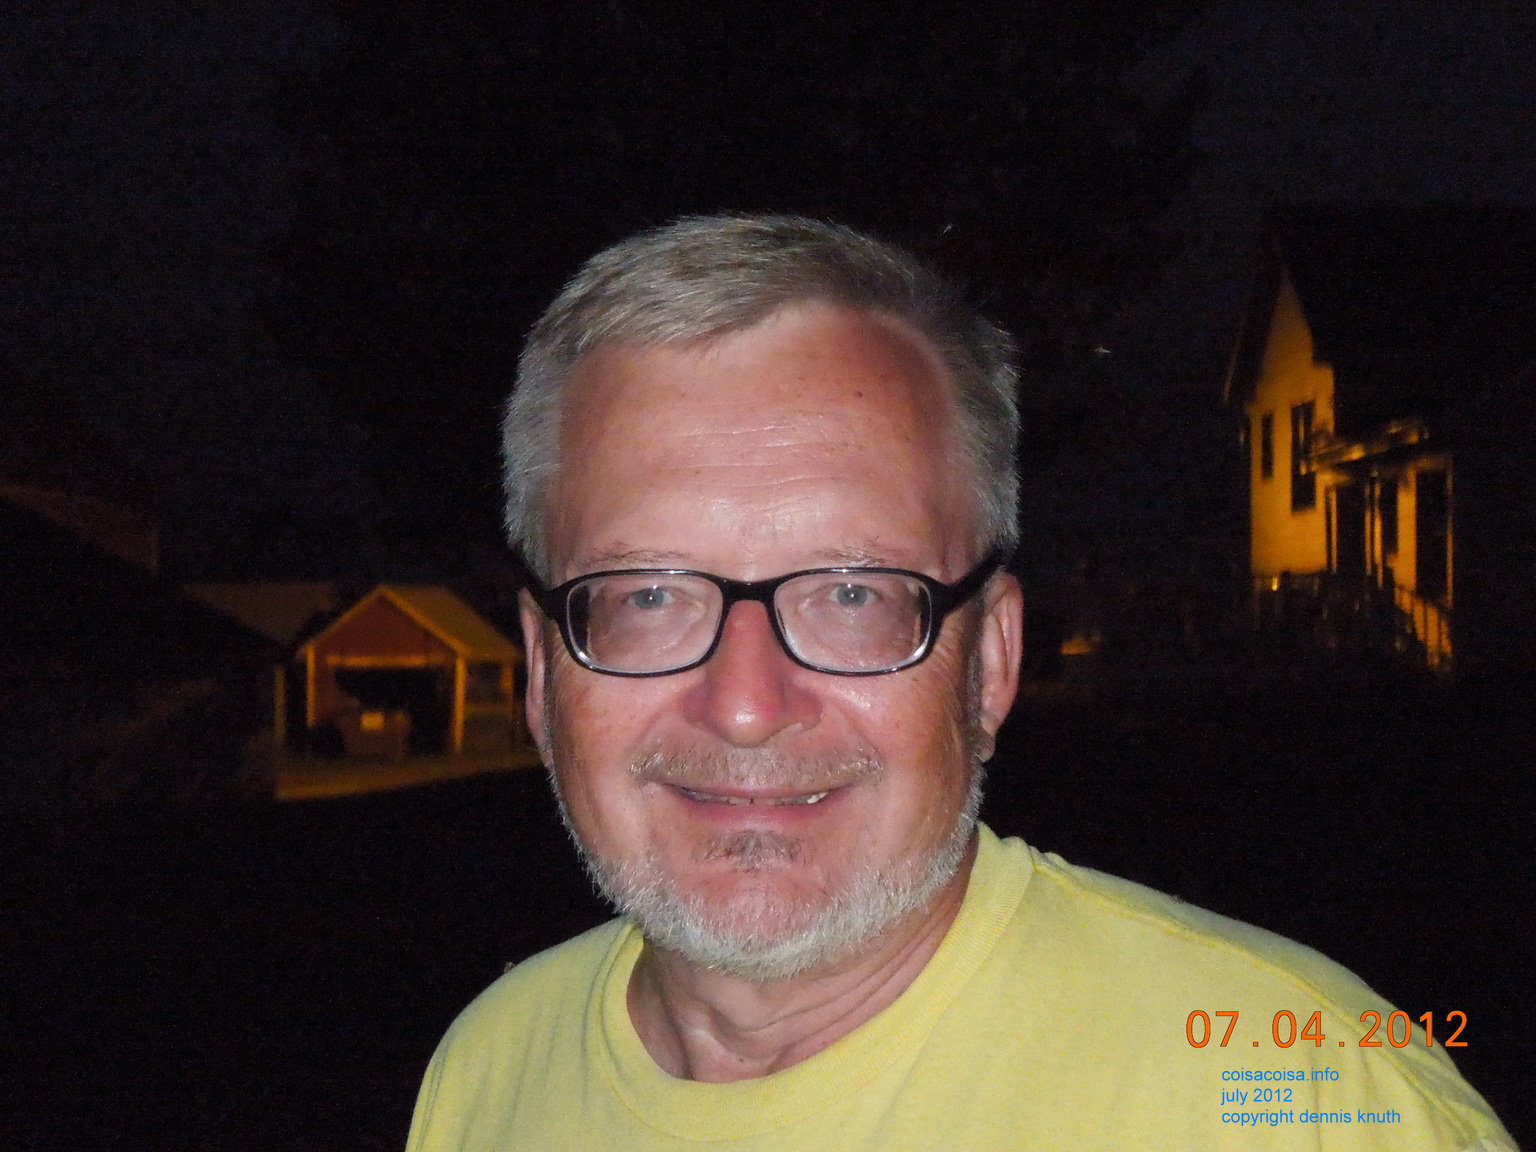 Dennis Knuth on the July 4th 2012